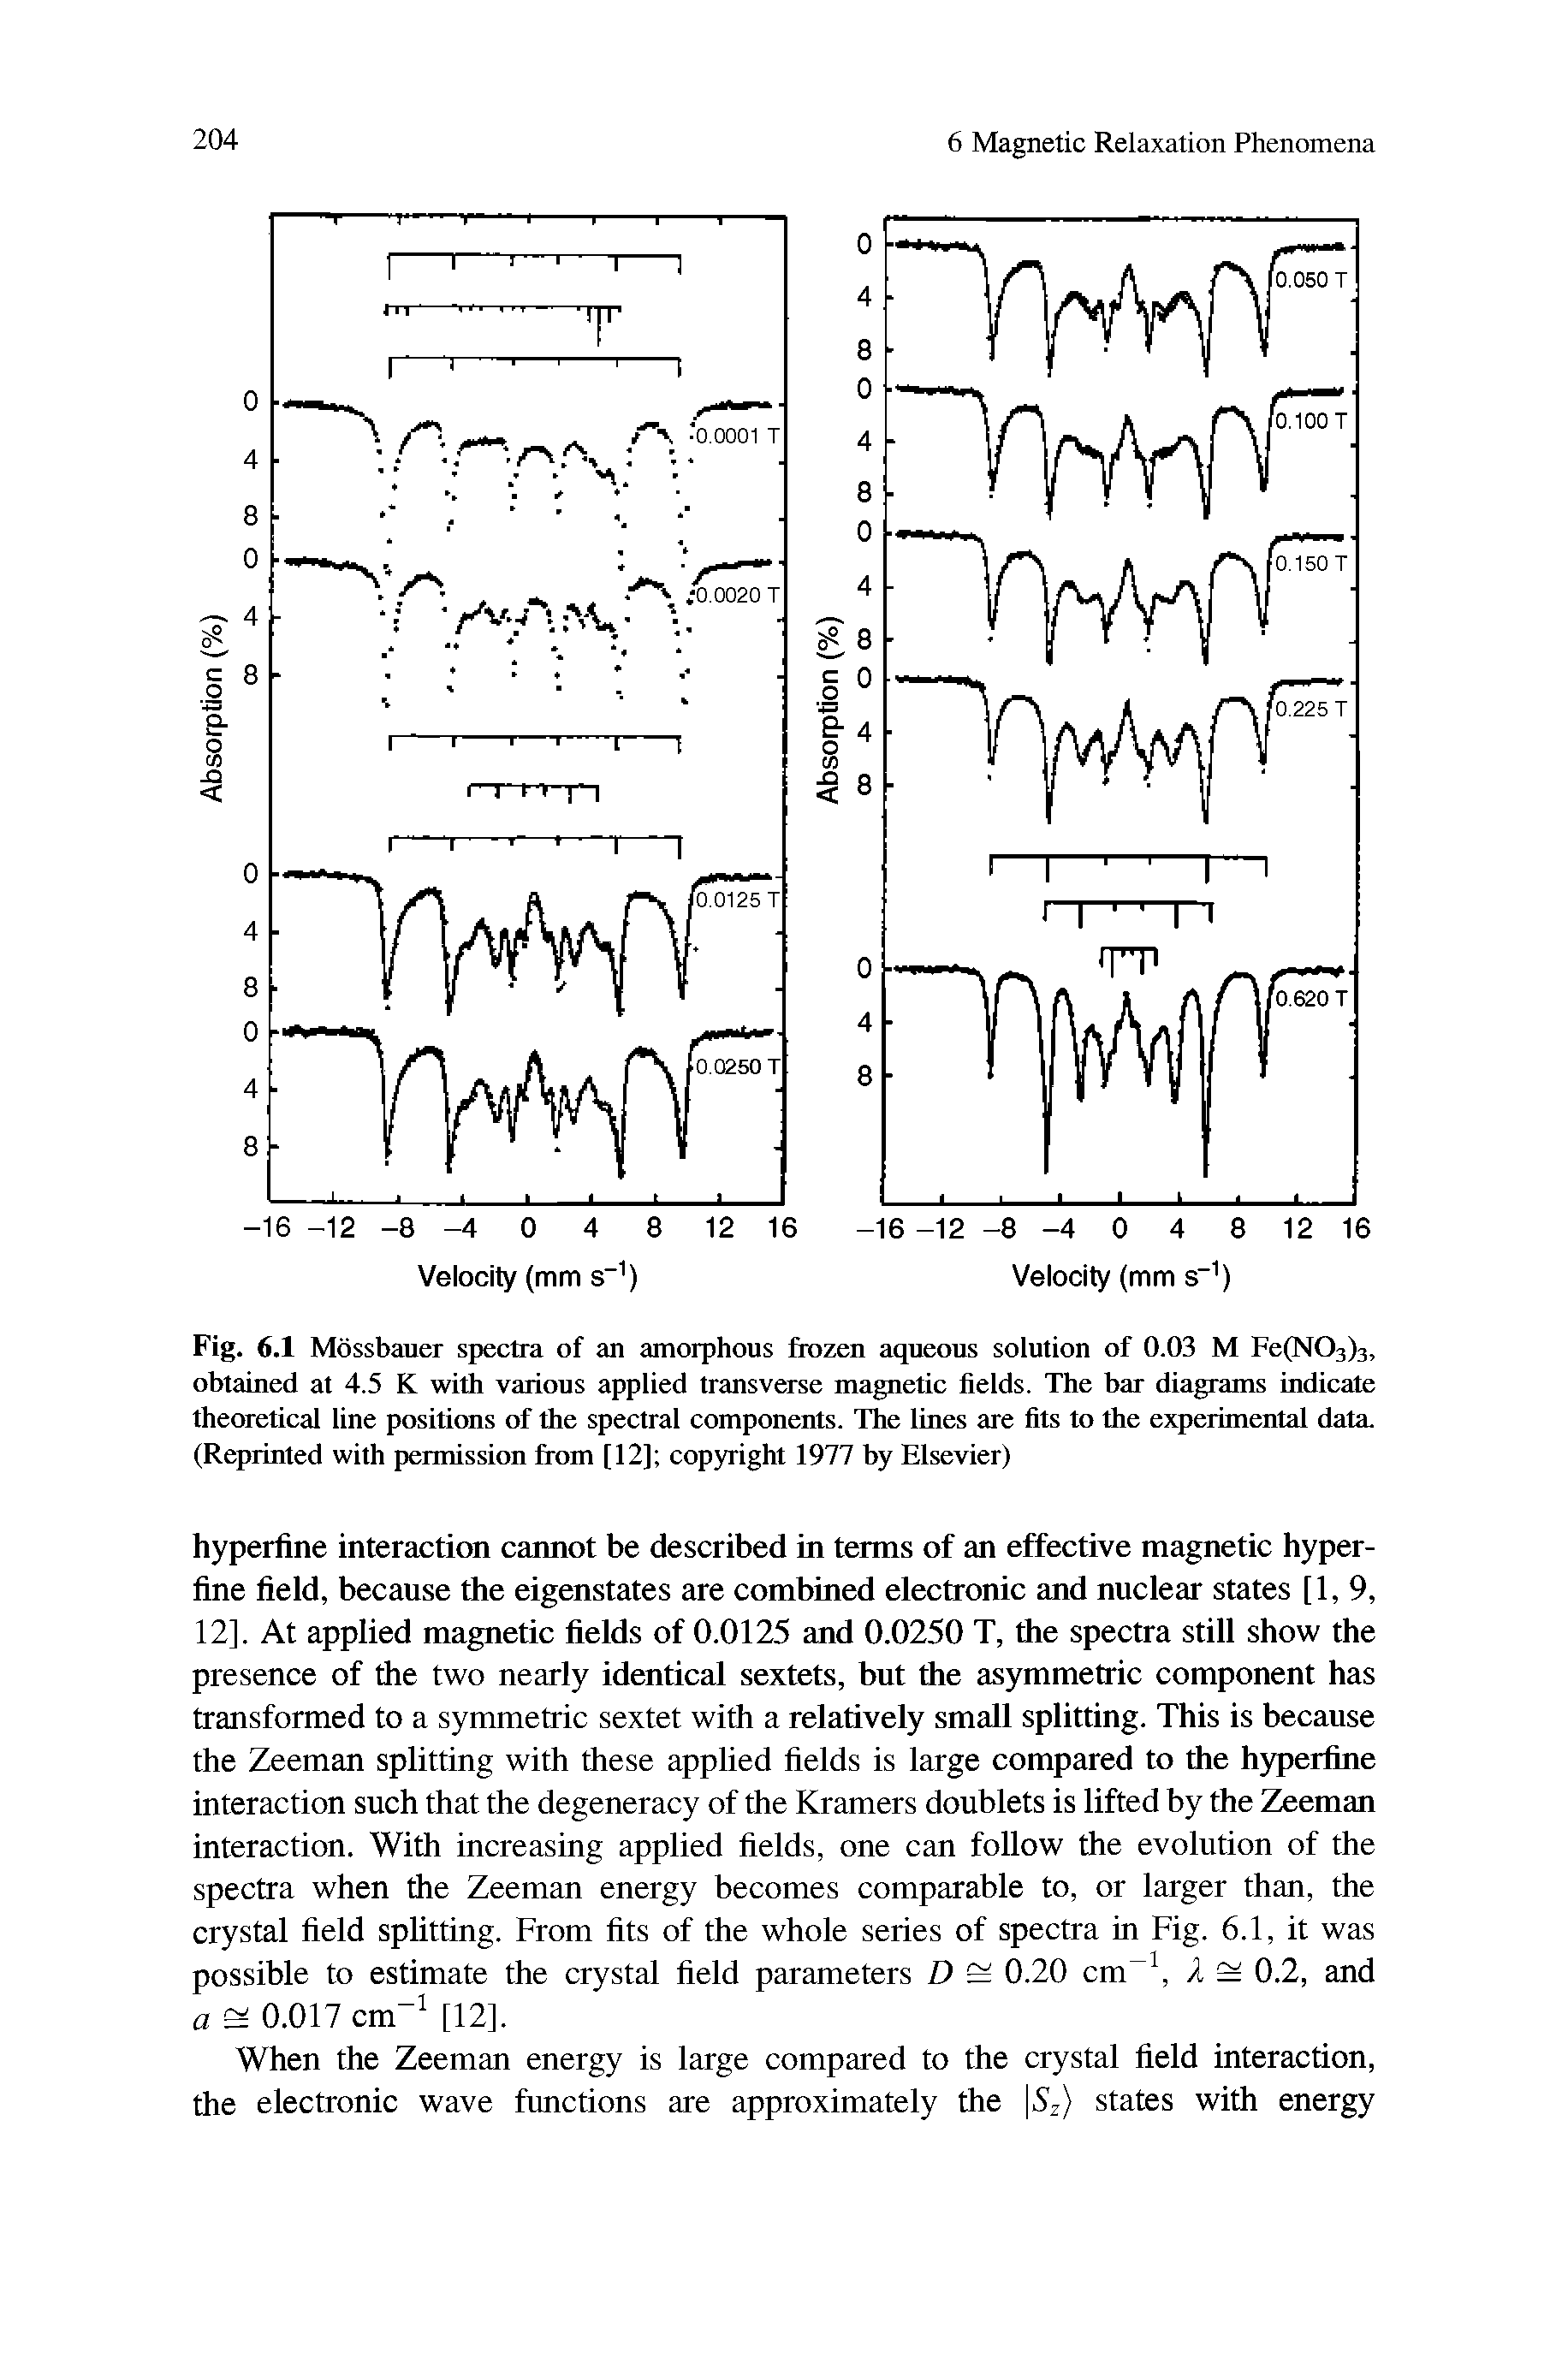 Fig. 6.1 Mossbauer spectra of an amorphous frozen aqueous solution of 0.03 M Fe(N03)3, obtained at 4.5 K with various applied transverse magnetic fields. The bar diagrams indicate theoretical line positions of the spectral components. The lines are fits to the experimental data. (Reprinted with permission from [12] copyright 1977 by Elsevier)...